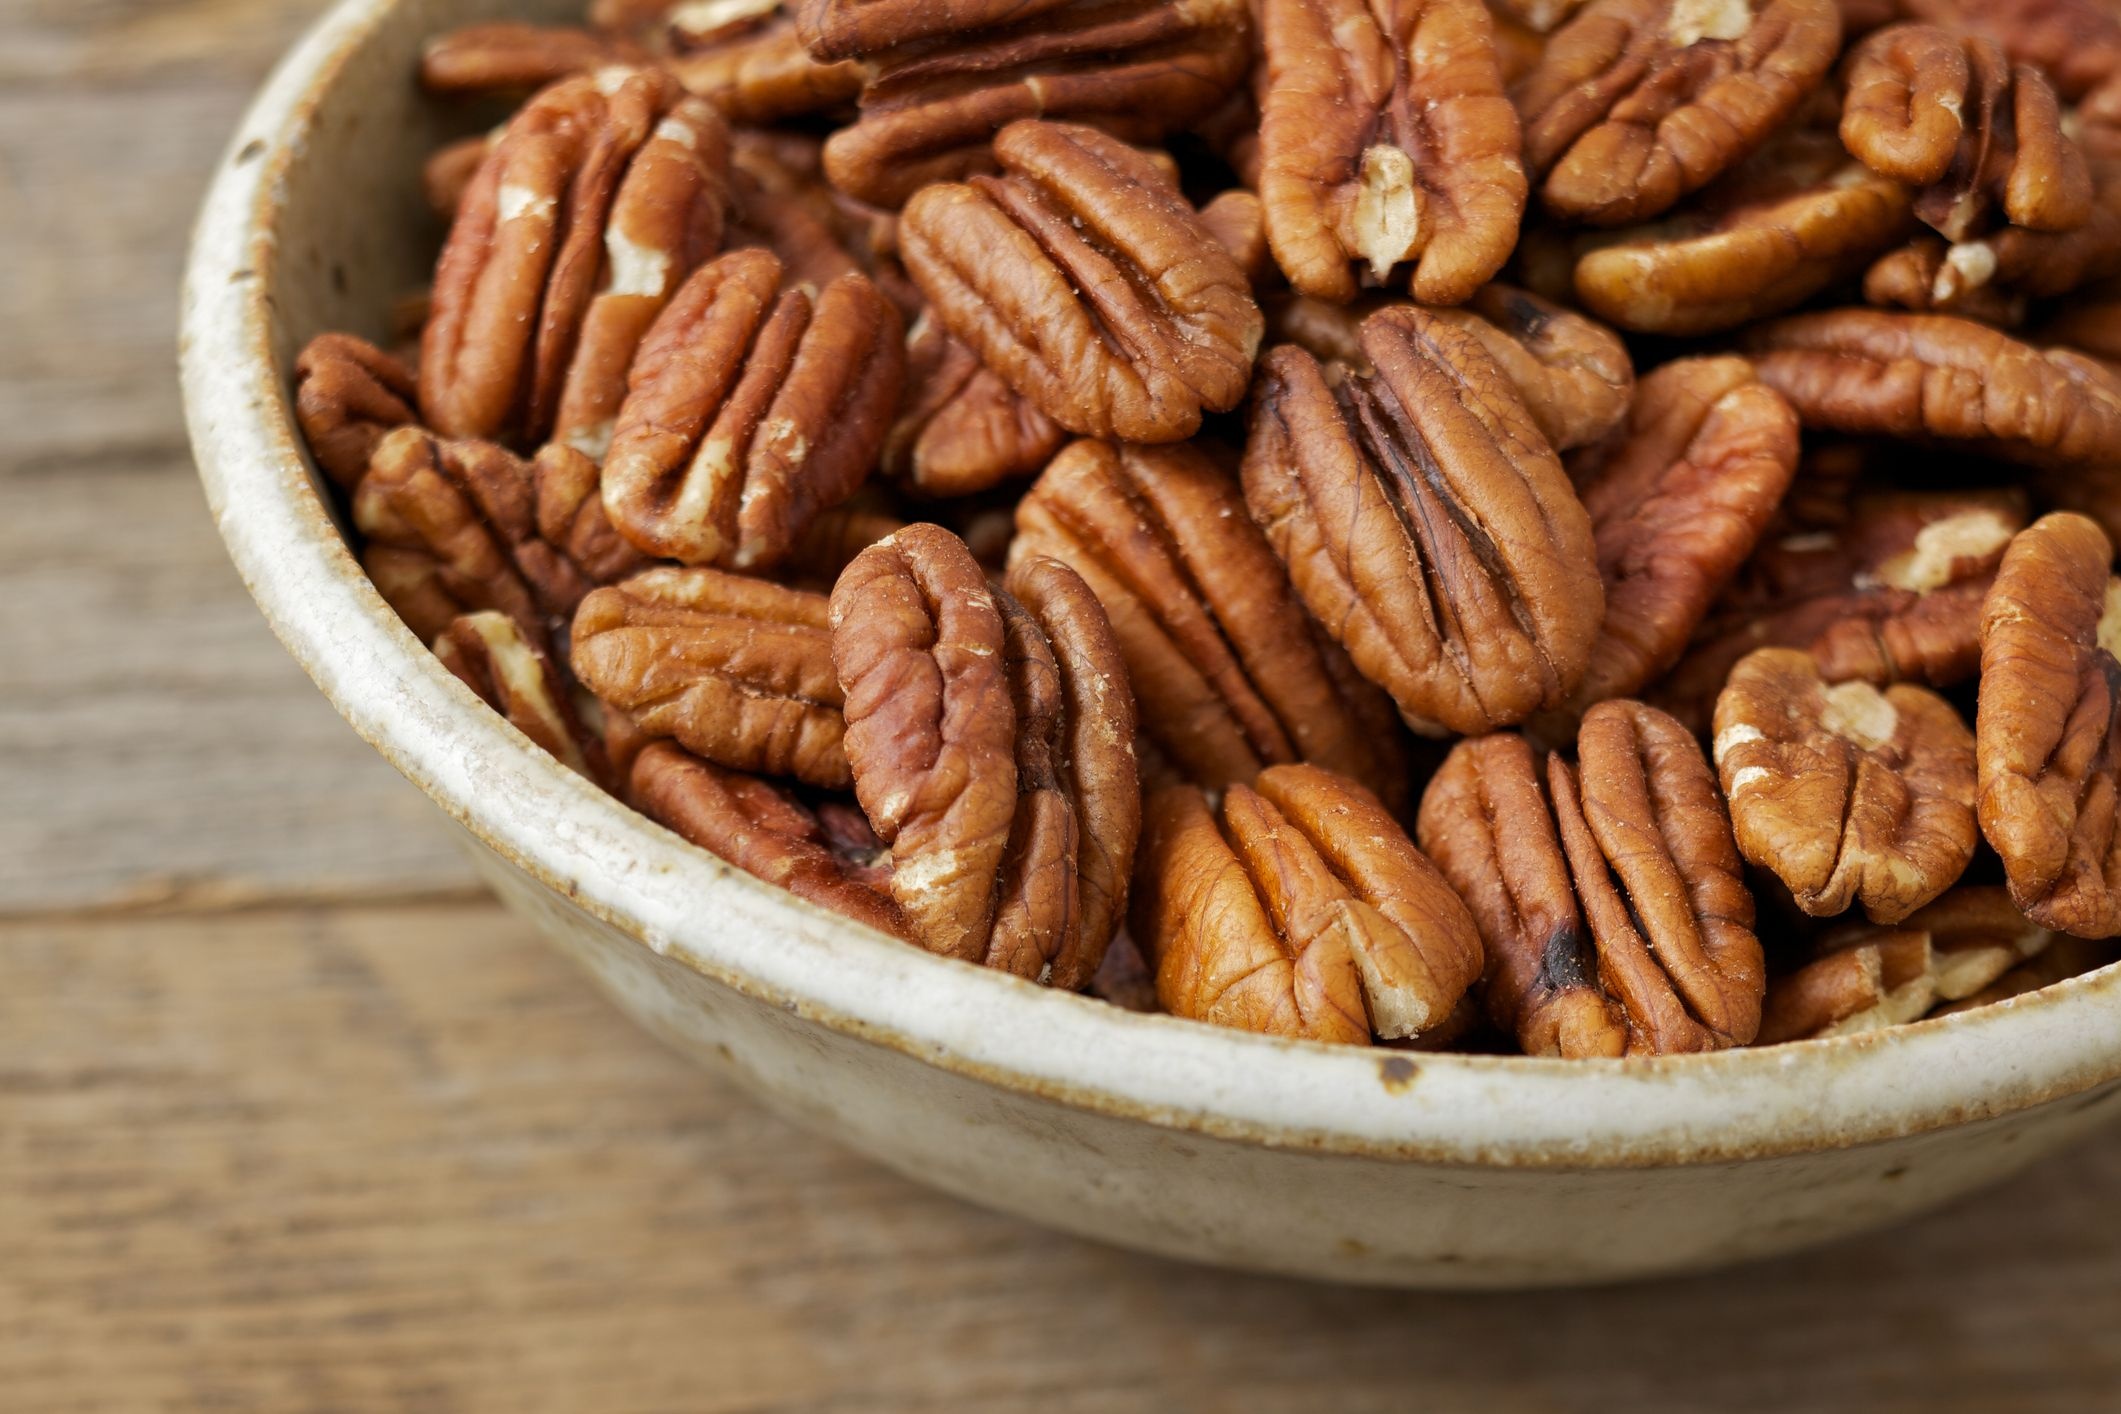 Pecans: Nuts, considered a foraged delicacy by colonists. 2130x1420 HD Wallpaper.